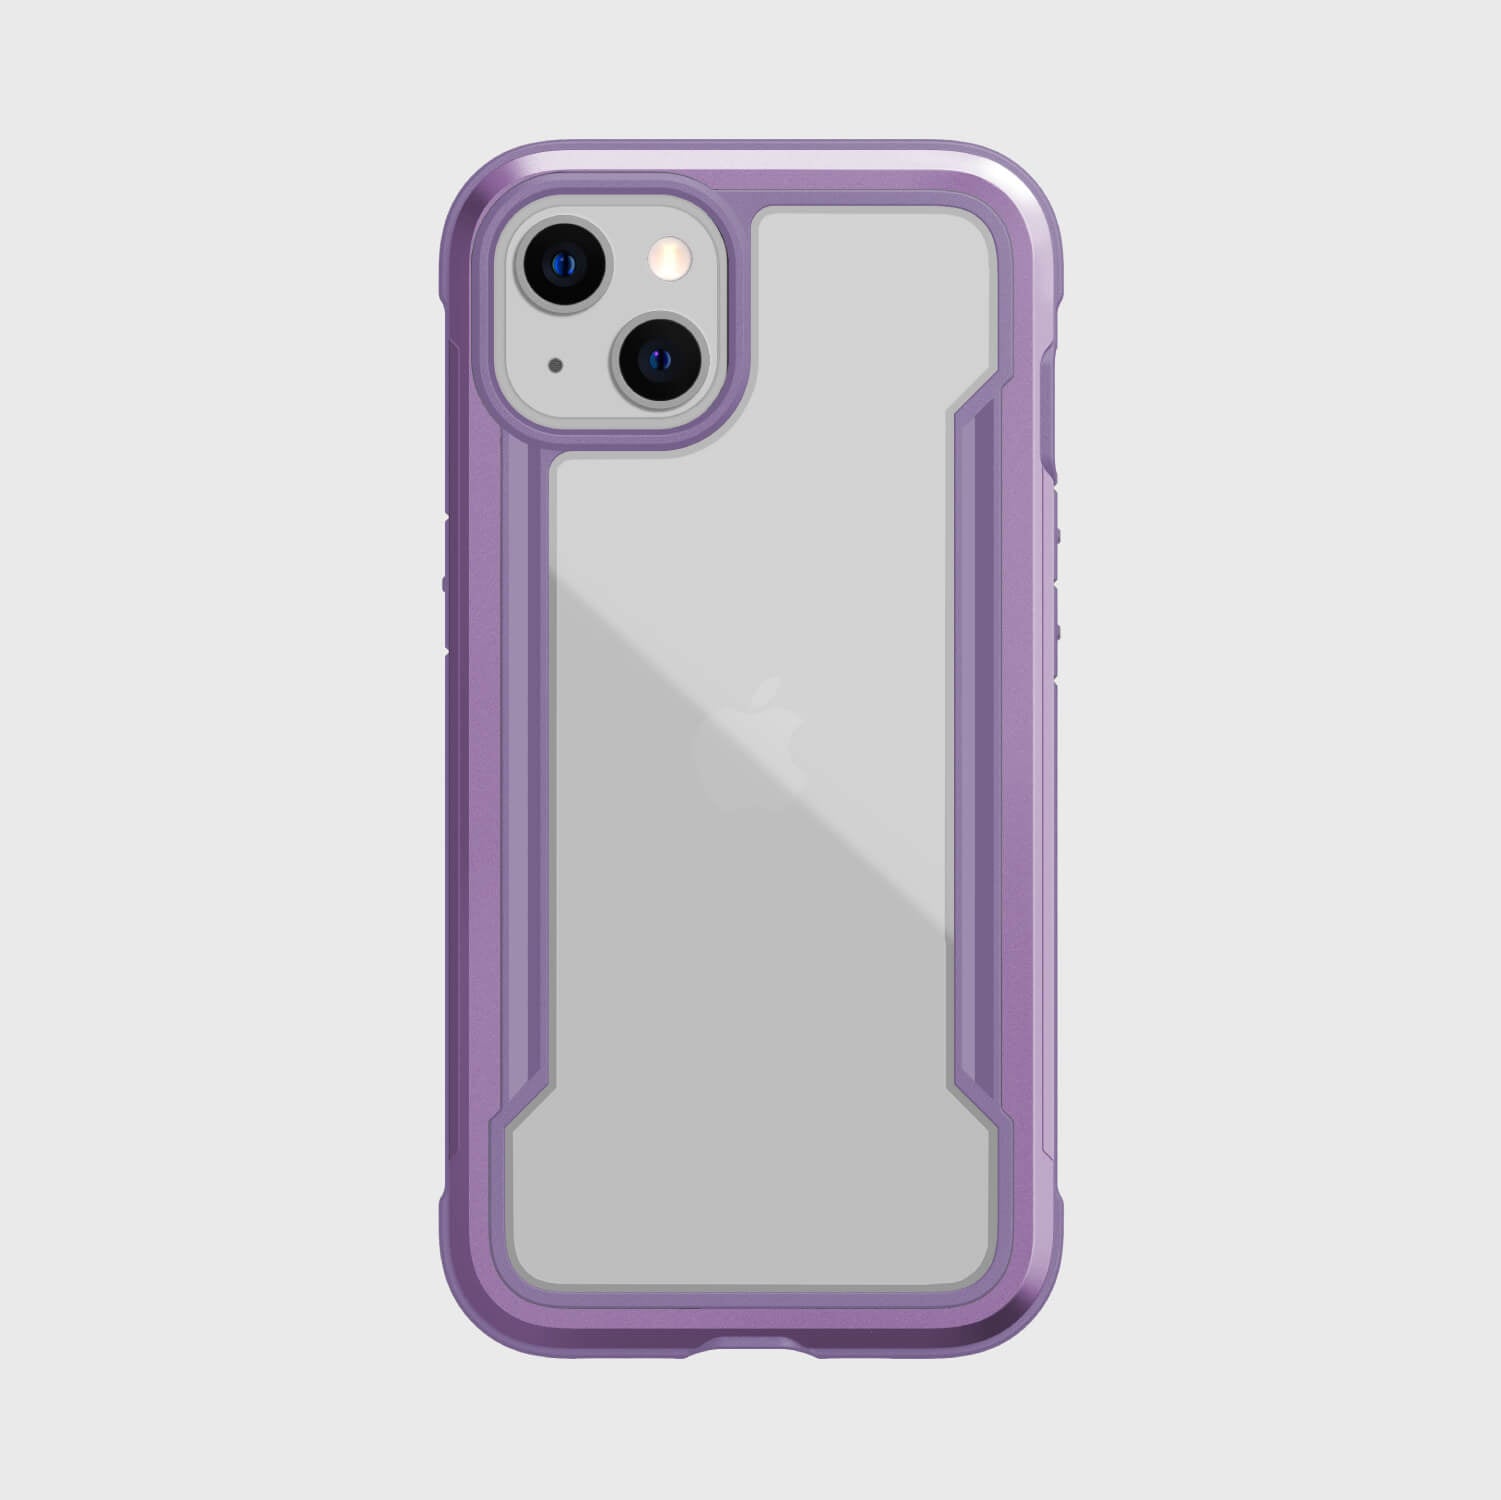 The back of a Raptic iPhone 13 Case - SHIELD PRO in purple, offering drop protection.